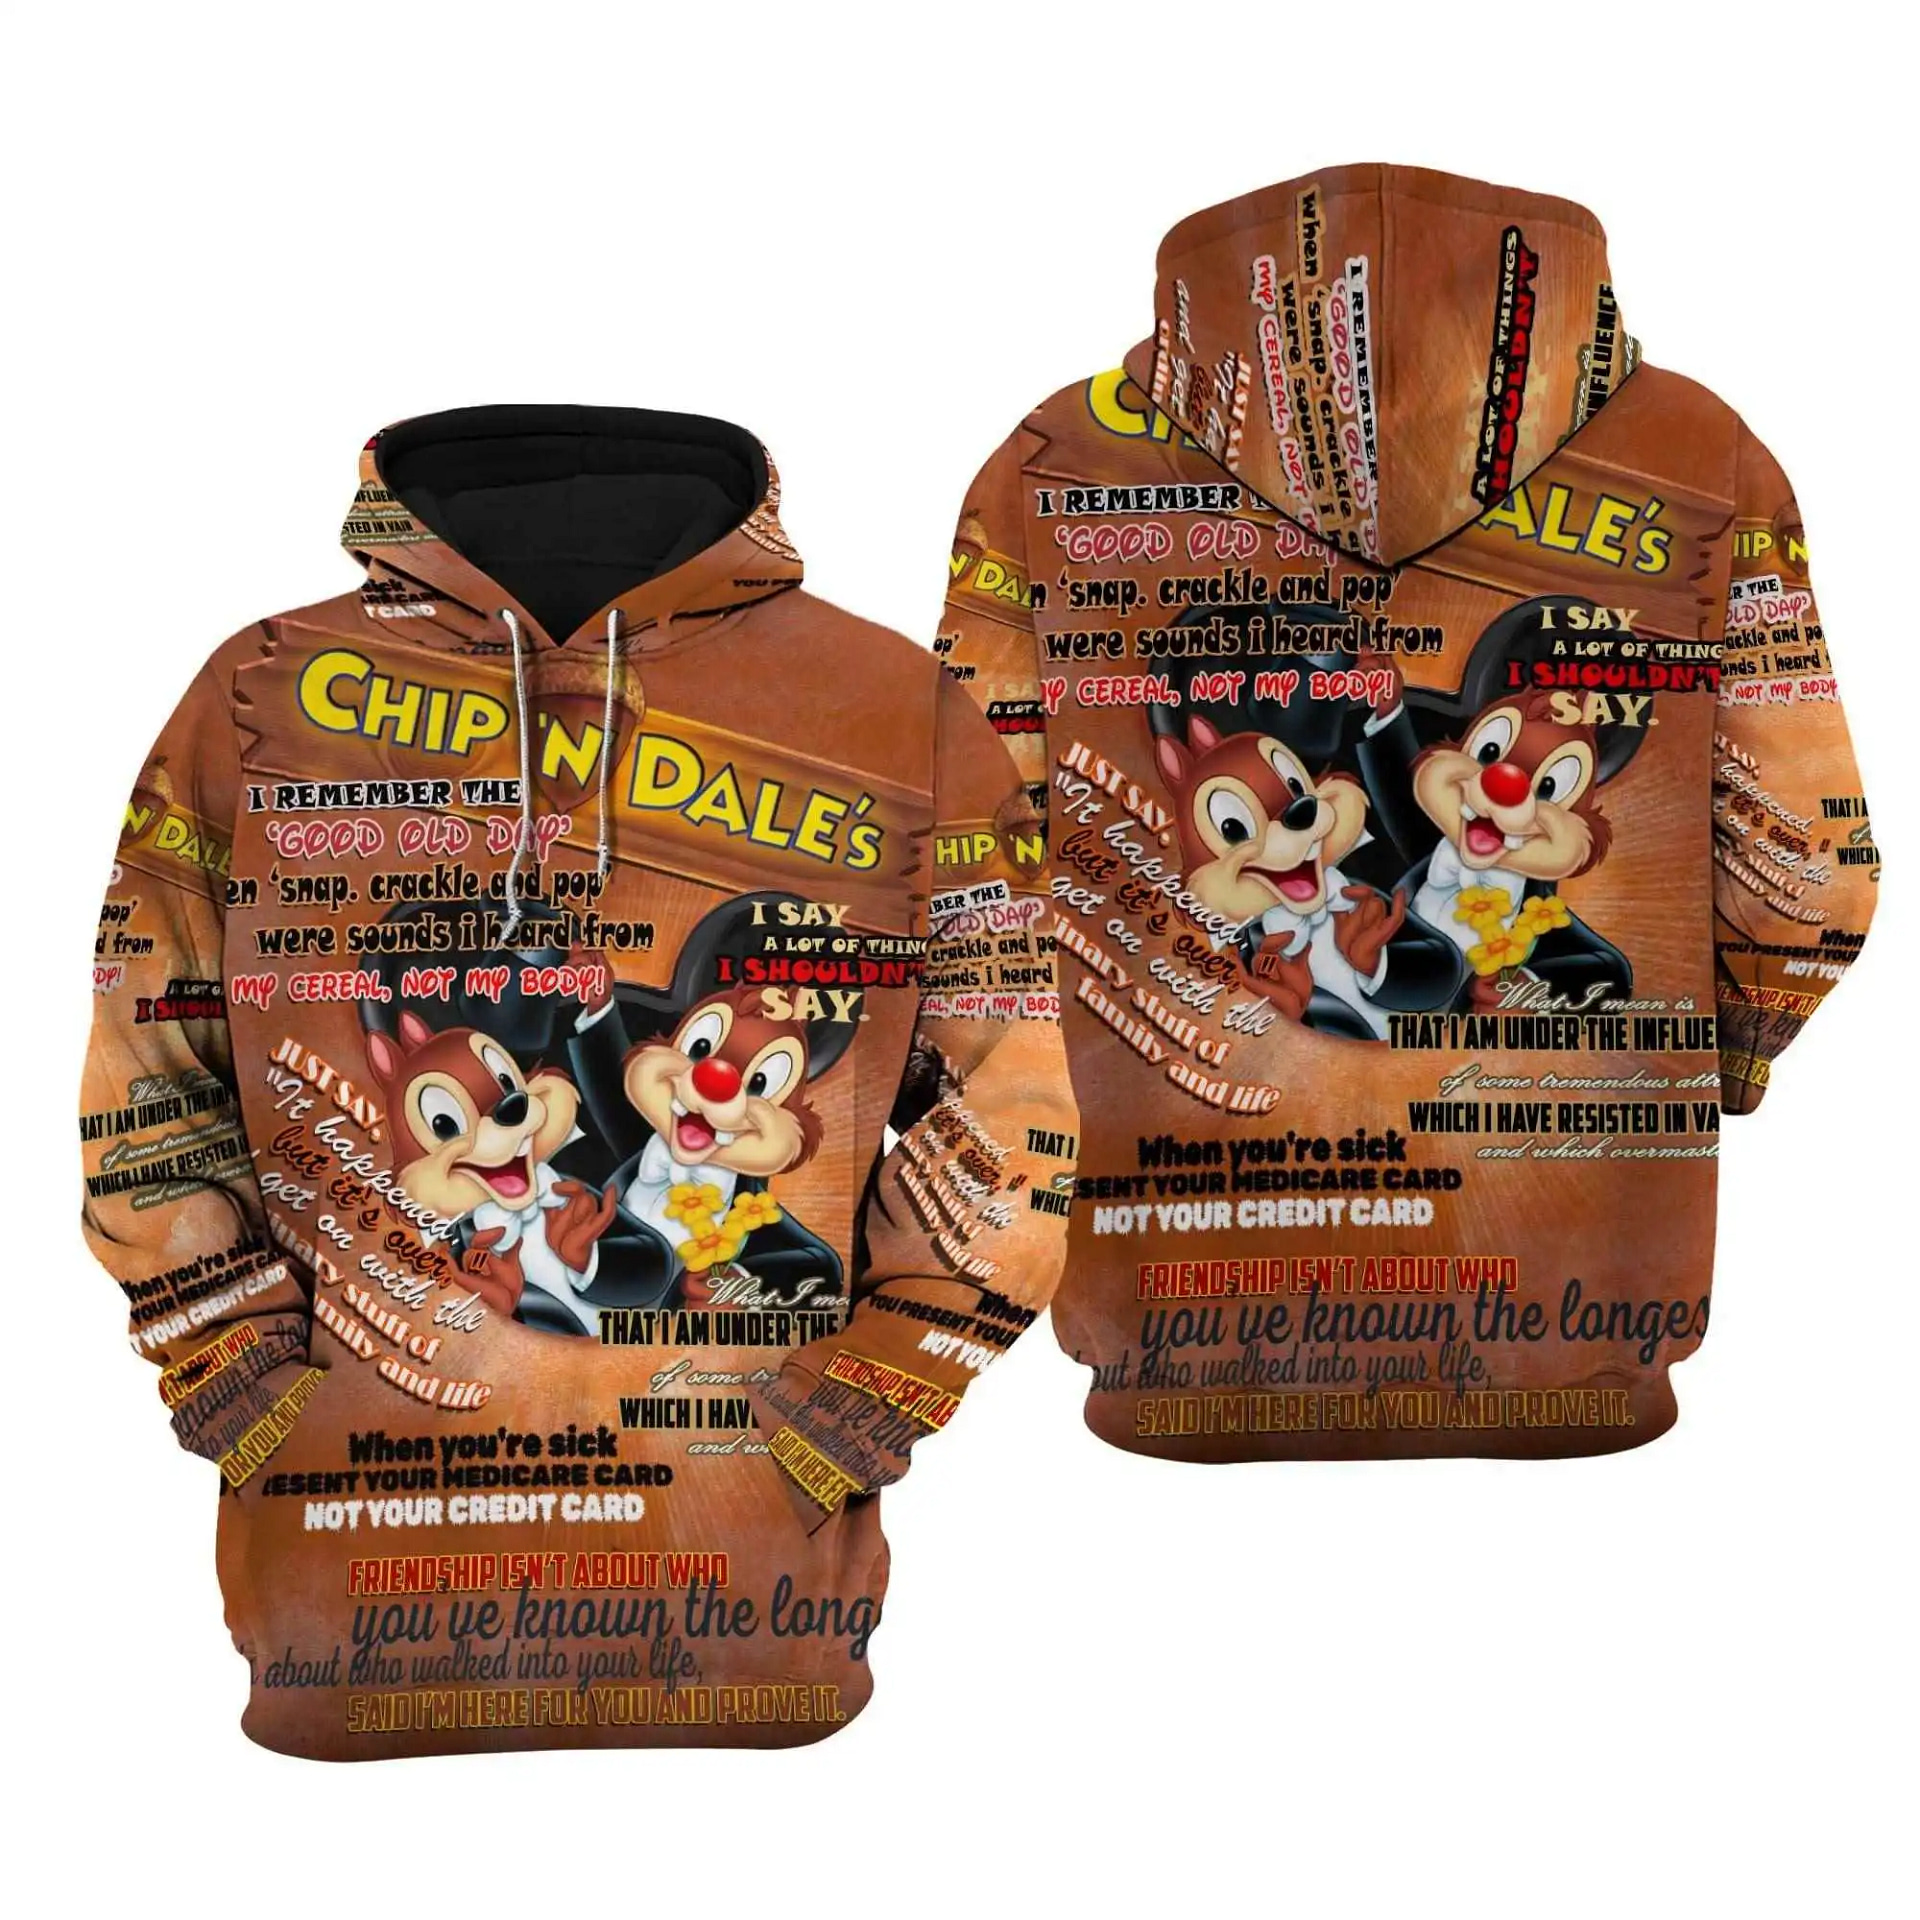 Chip N Dale Punk Words Pattern Disney Quotes Cartoon Graphic Outfits Clothing Men Women Kids Toddlers Hoodie 3D